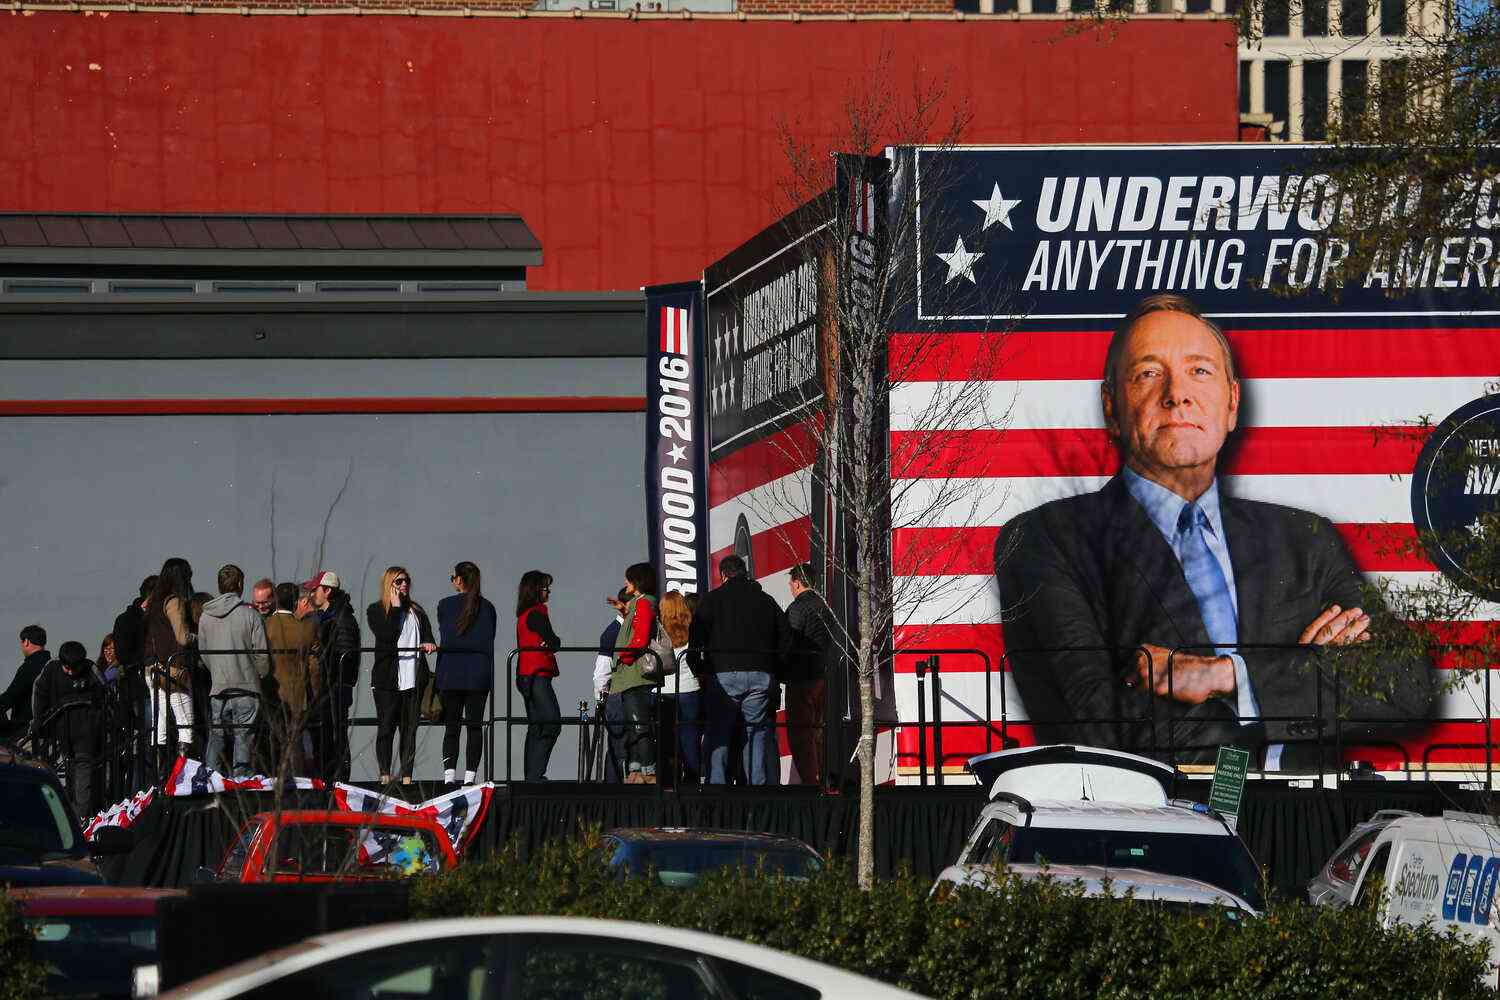 Kevin Spacey Ordered to Pay $31 Million to ‘House of Cards’ Studio